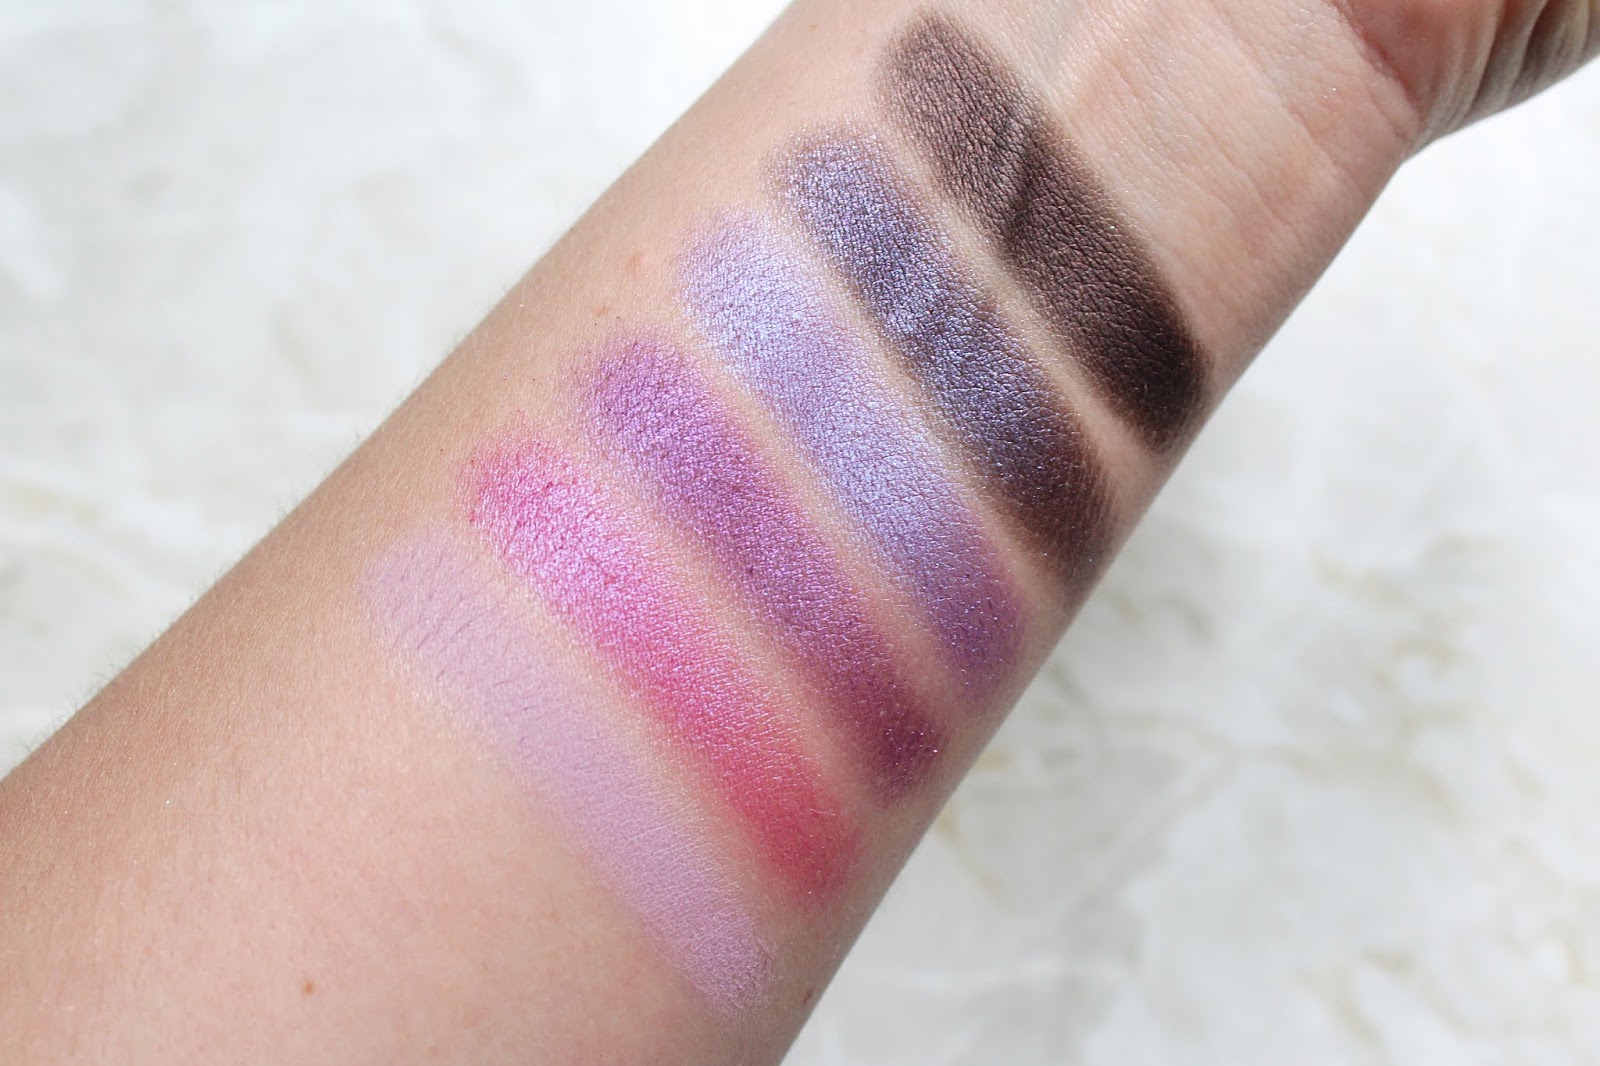 Urban Decay Ultraviolet Palette Review (+ Swatches)